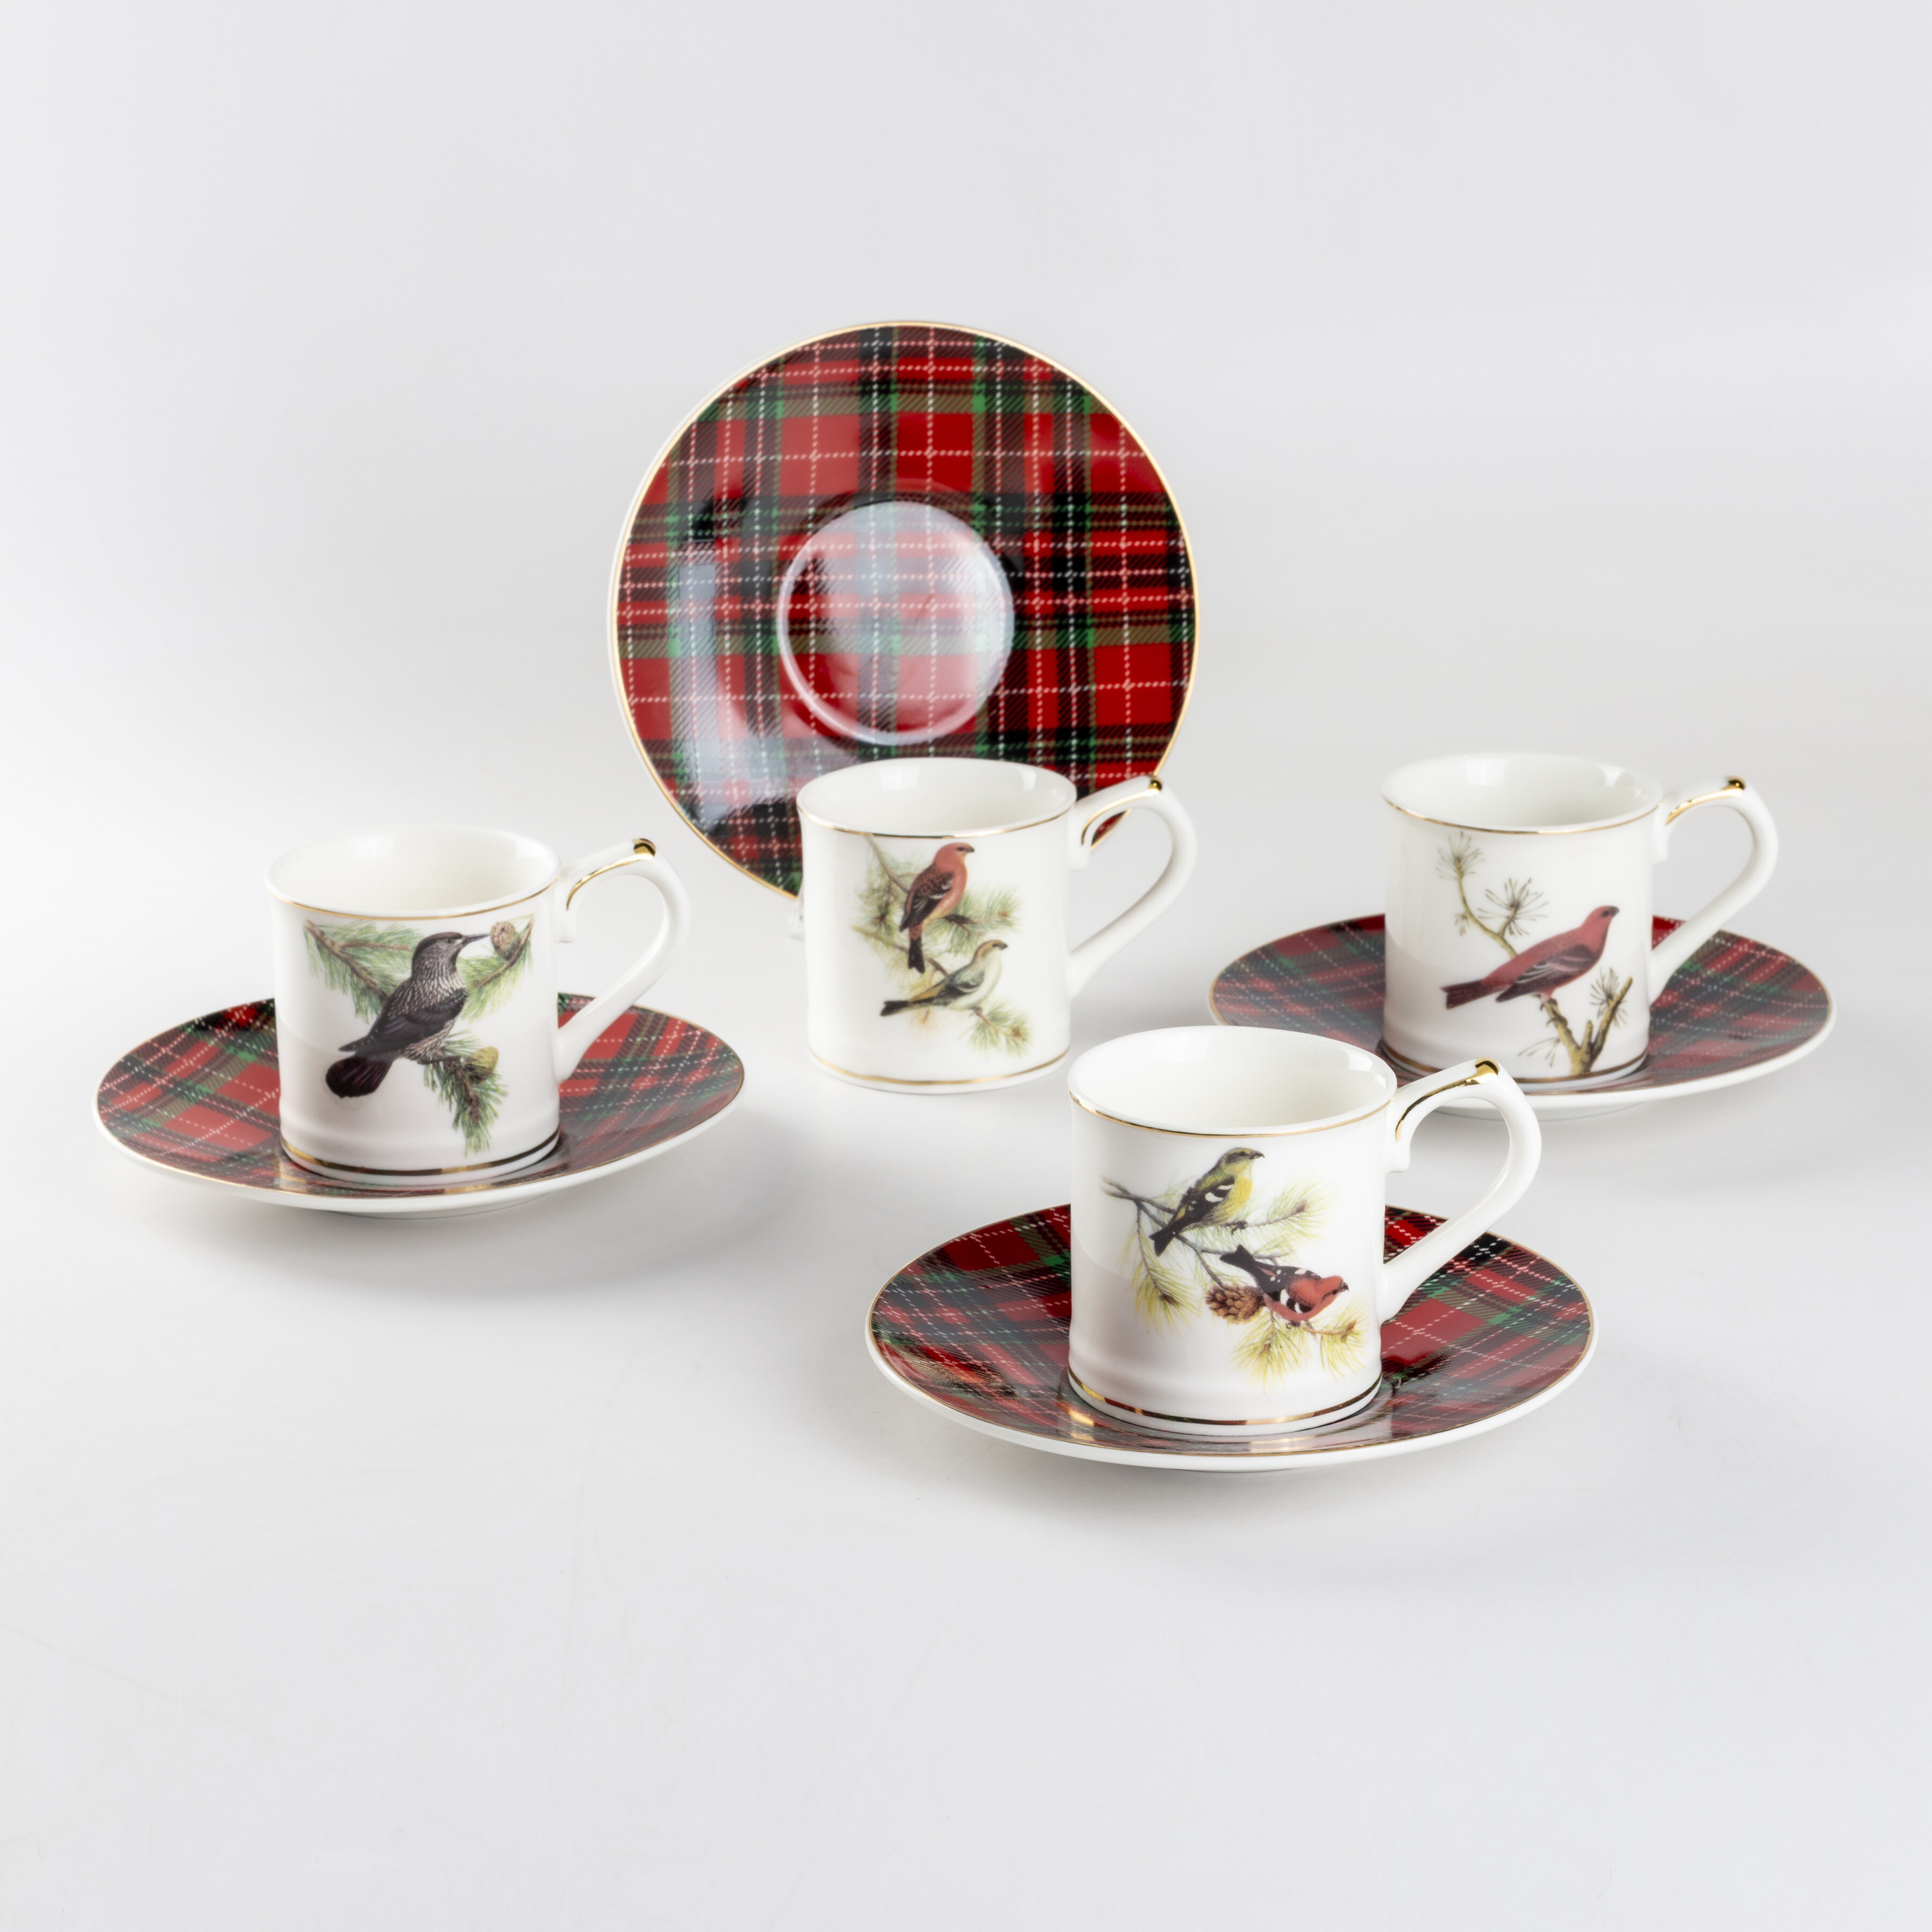 Grace's Teaware Merry Christmas Expresso Set of Four Porcelain Cups & Saucers 